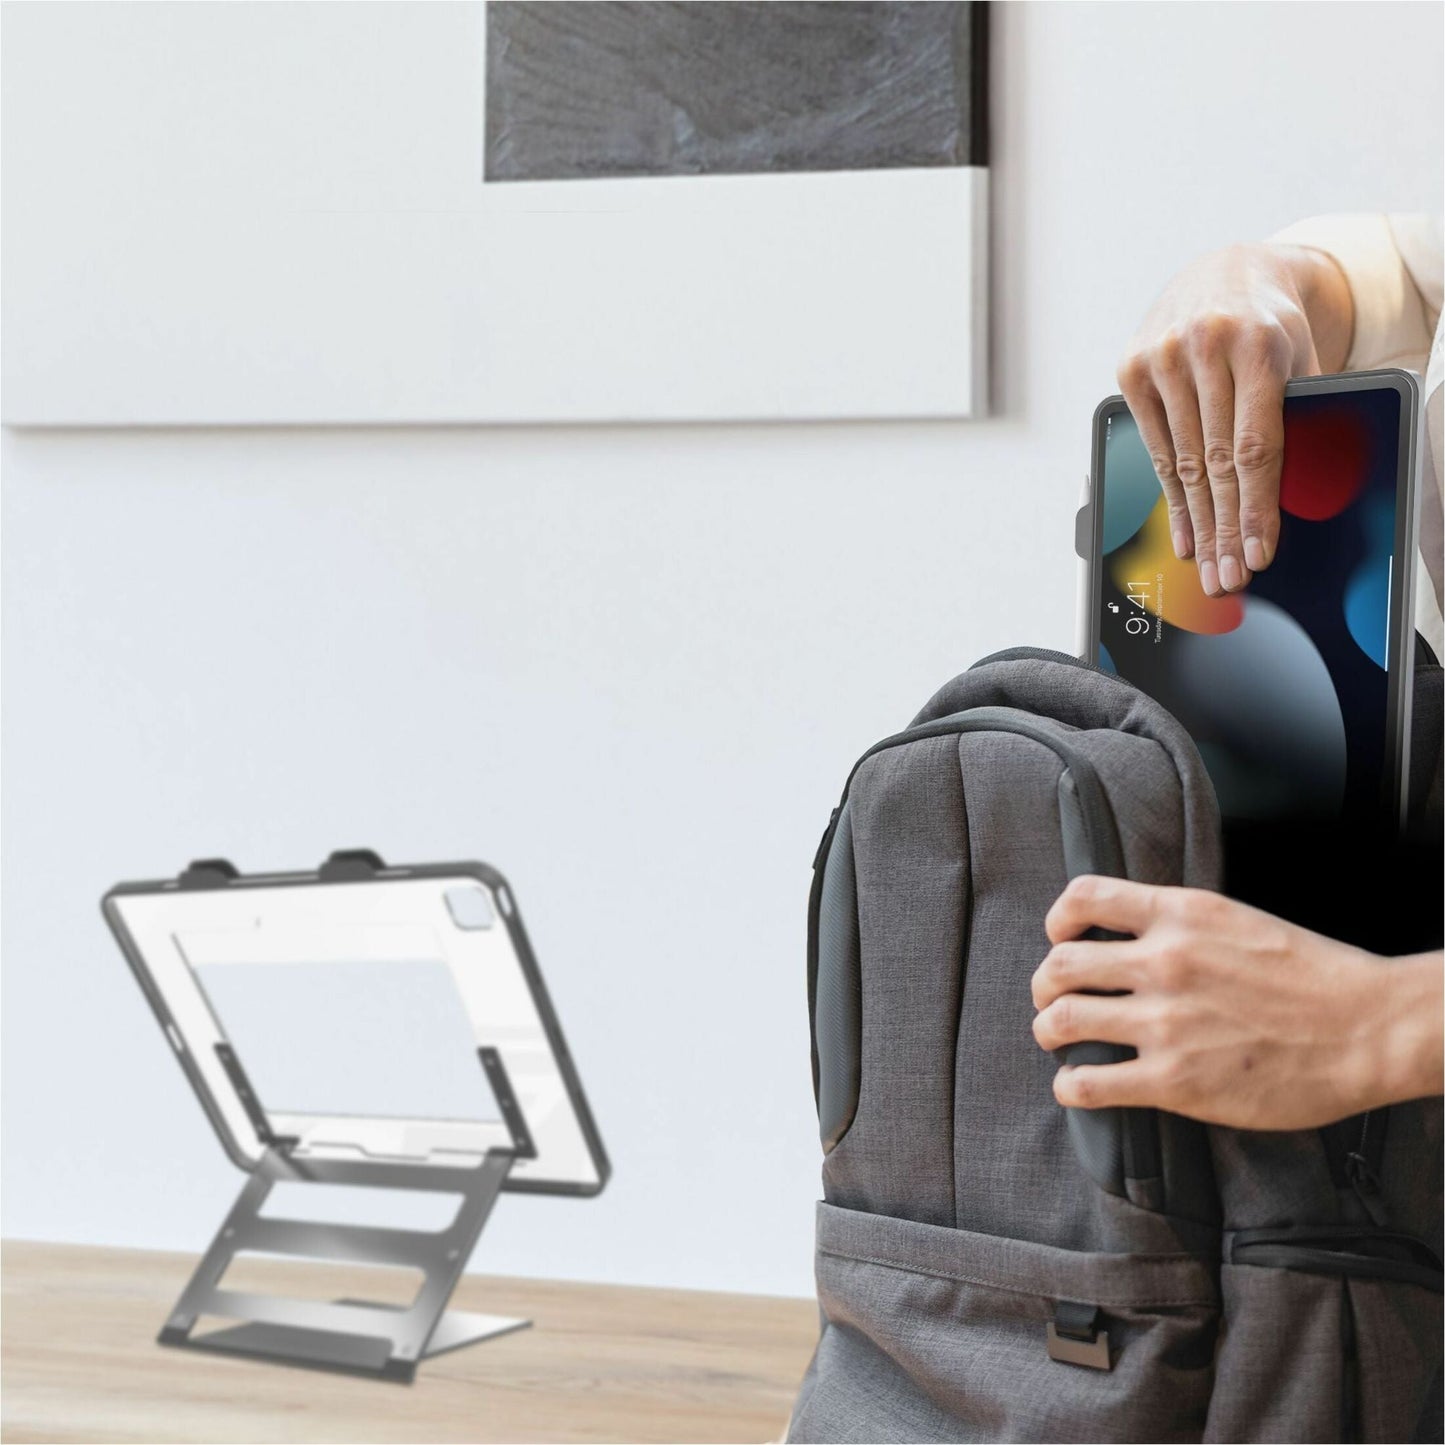 CTA Digital Tablet Carrying Case for iPad 10.2" with Kickstand